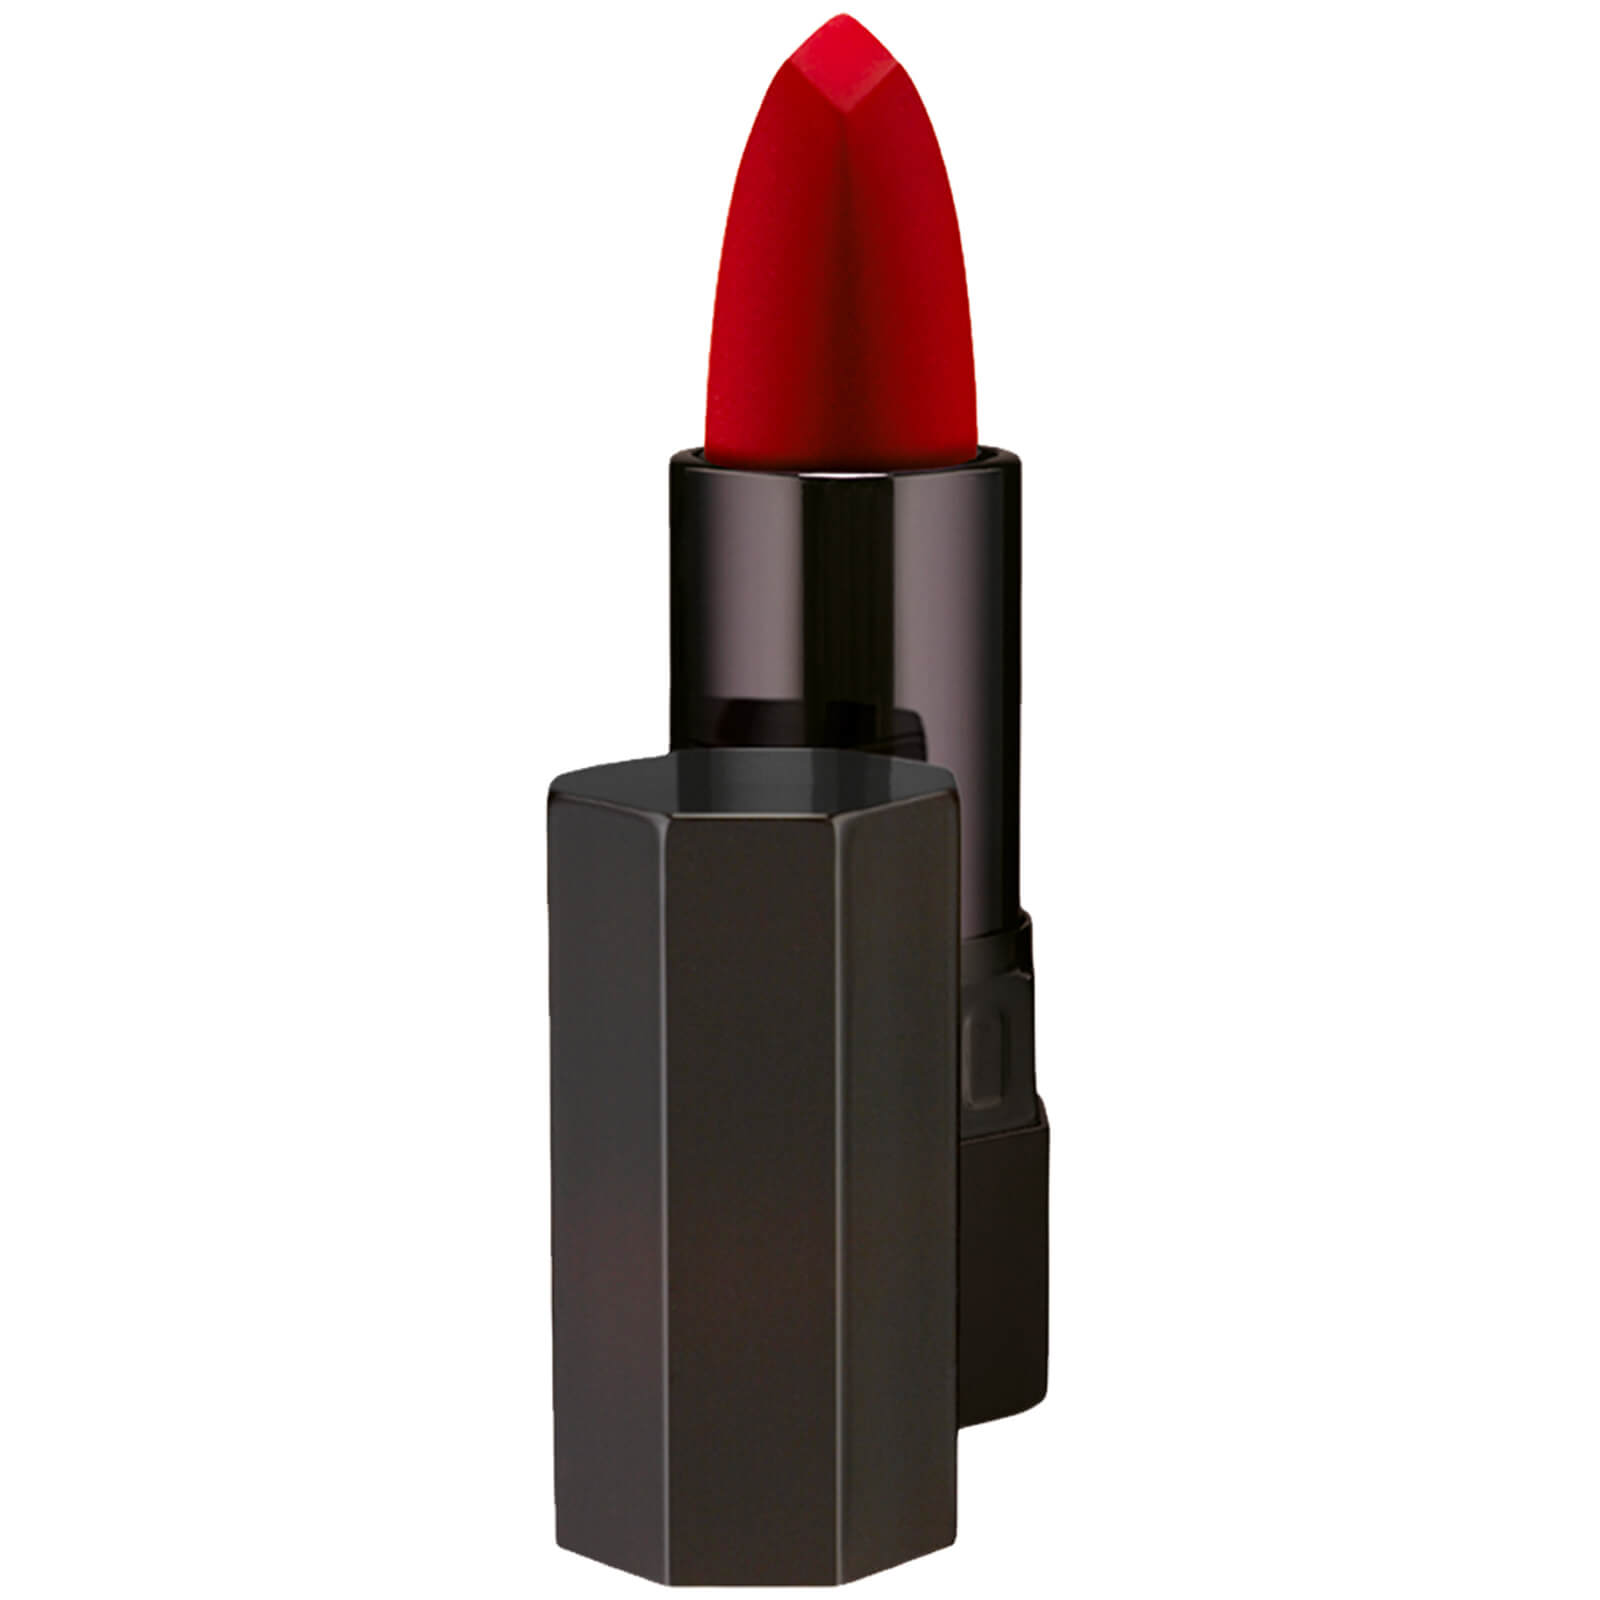 Serge Lutens Lipstick Fard a Levres Refill 2.3g (Various Shades) - Ndeg1 Mise a mort